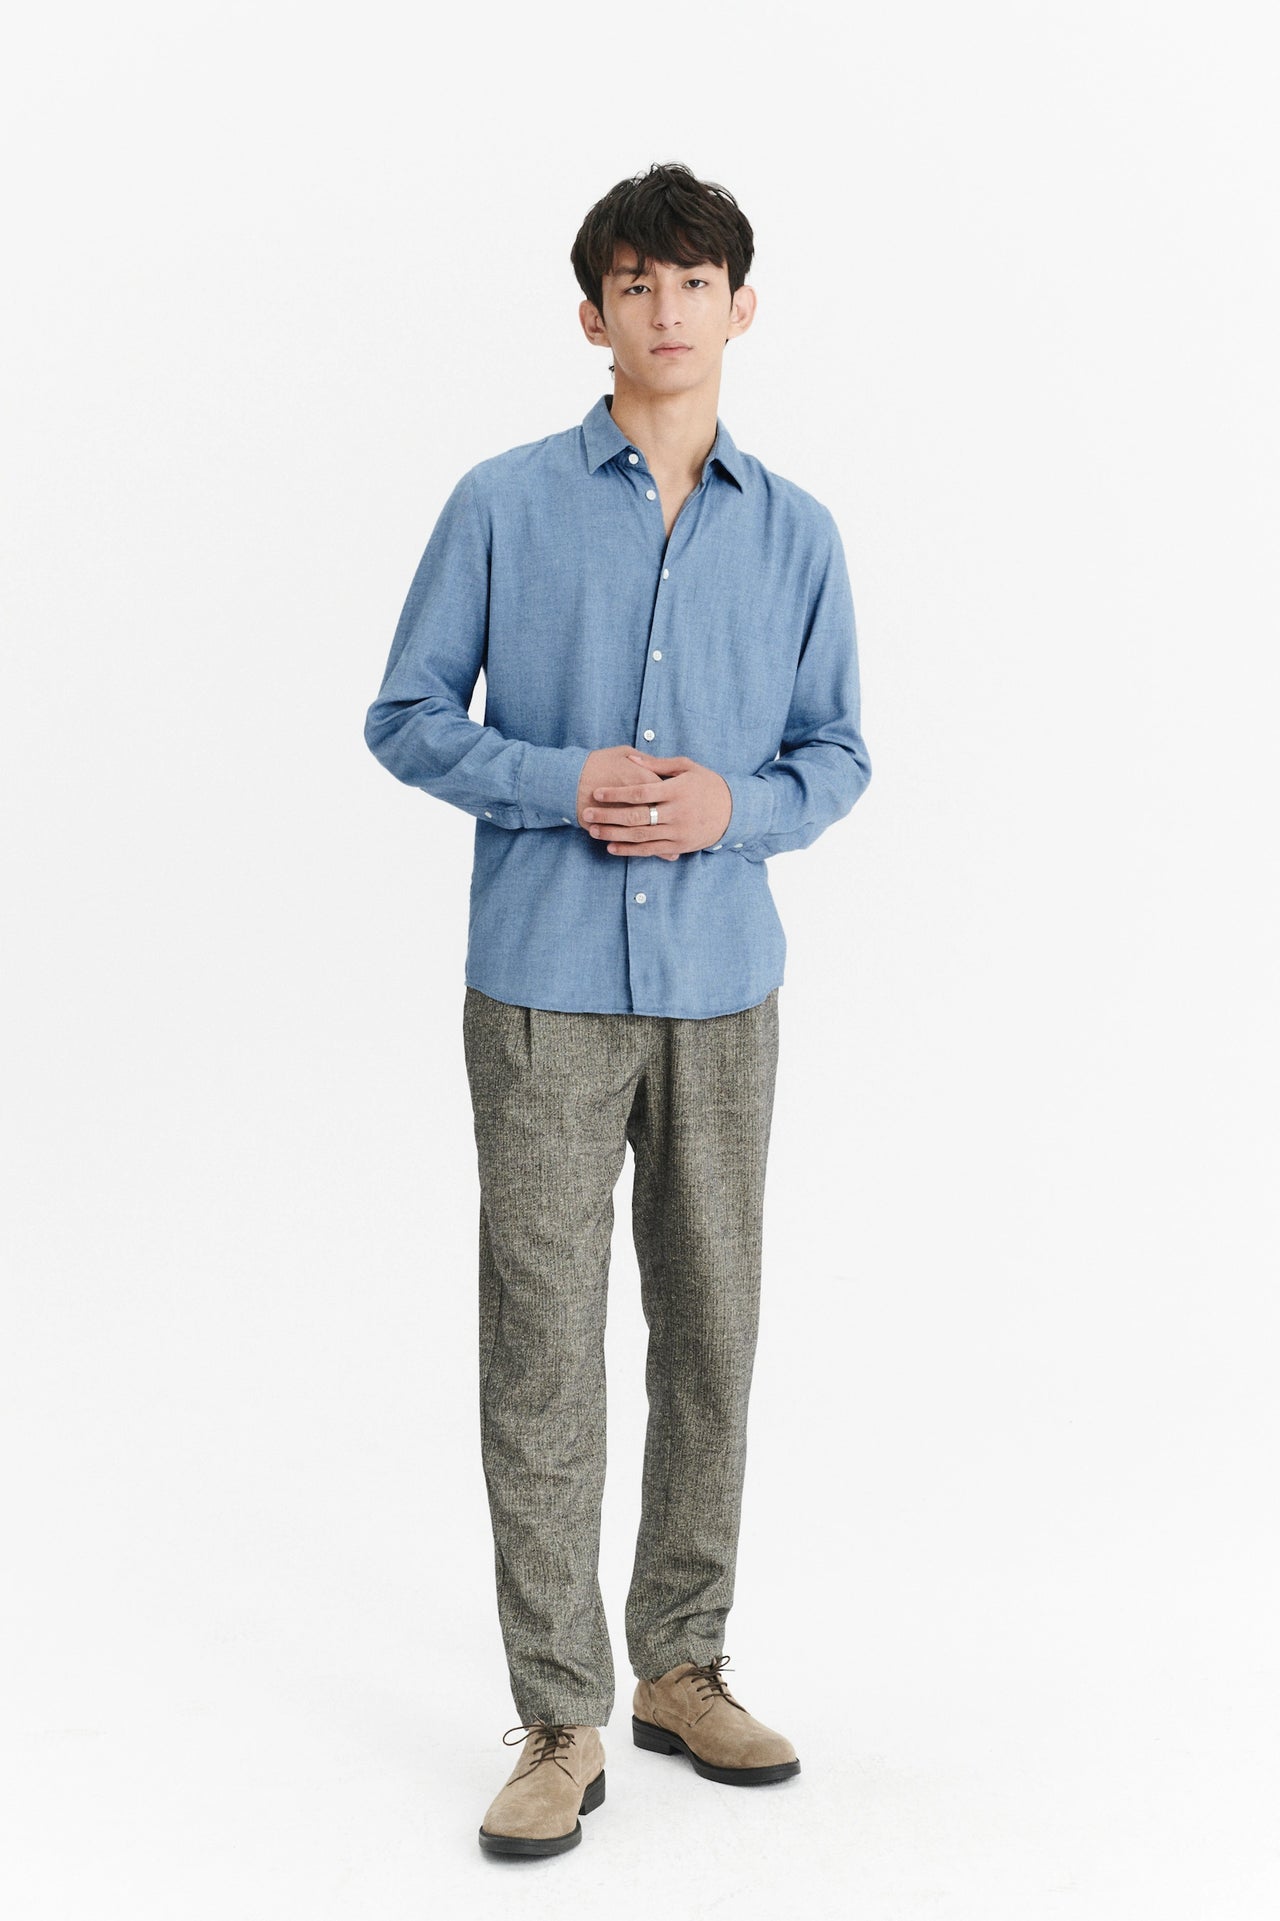 Feel Good Shirt in a Blue Utterly Soft and Silky Italian Lyocell and Cotton Flannel by Albini